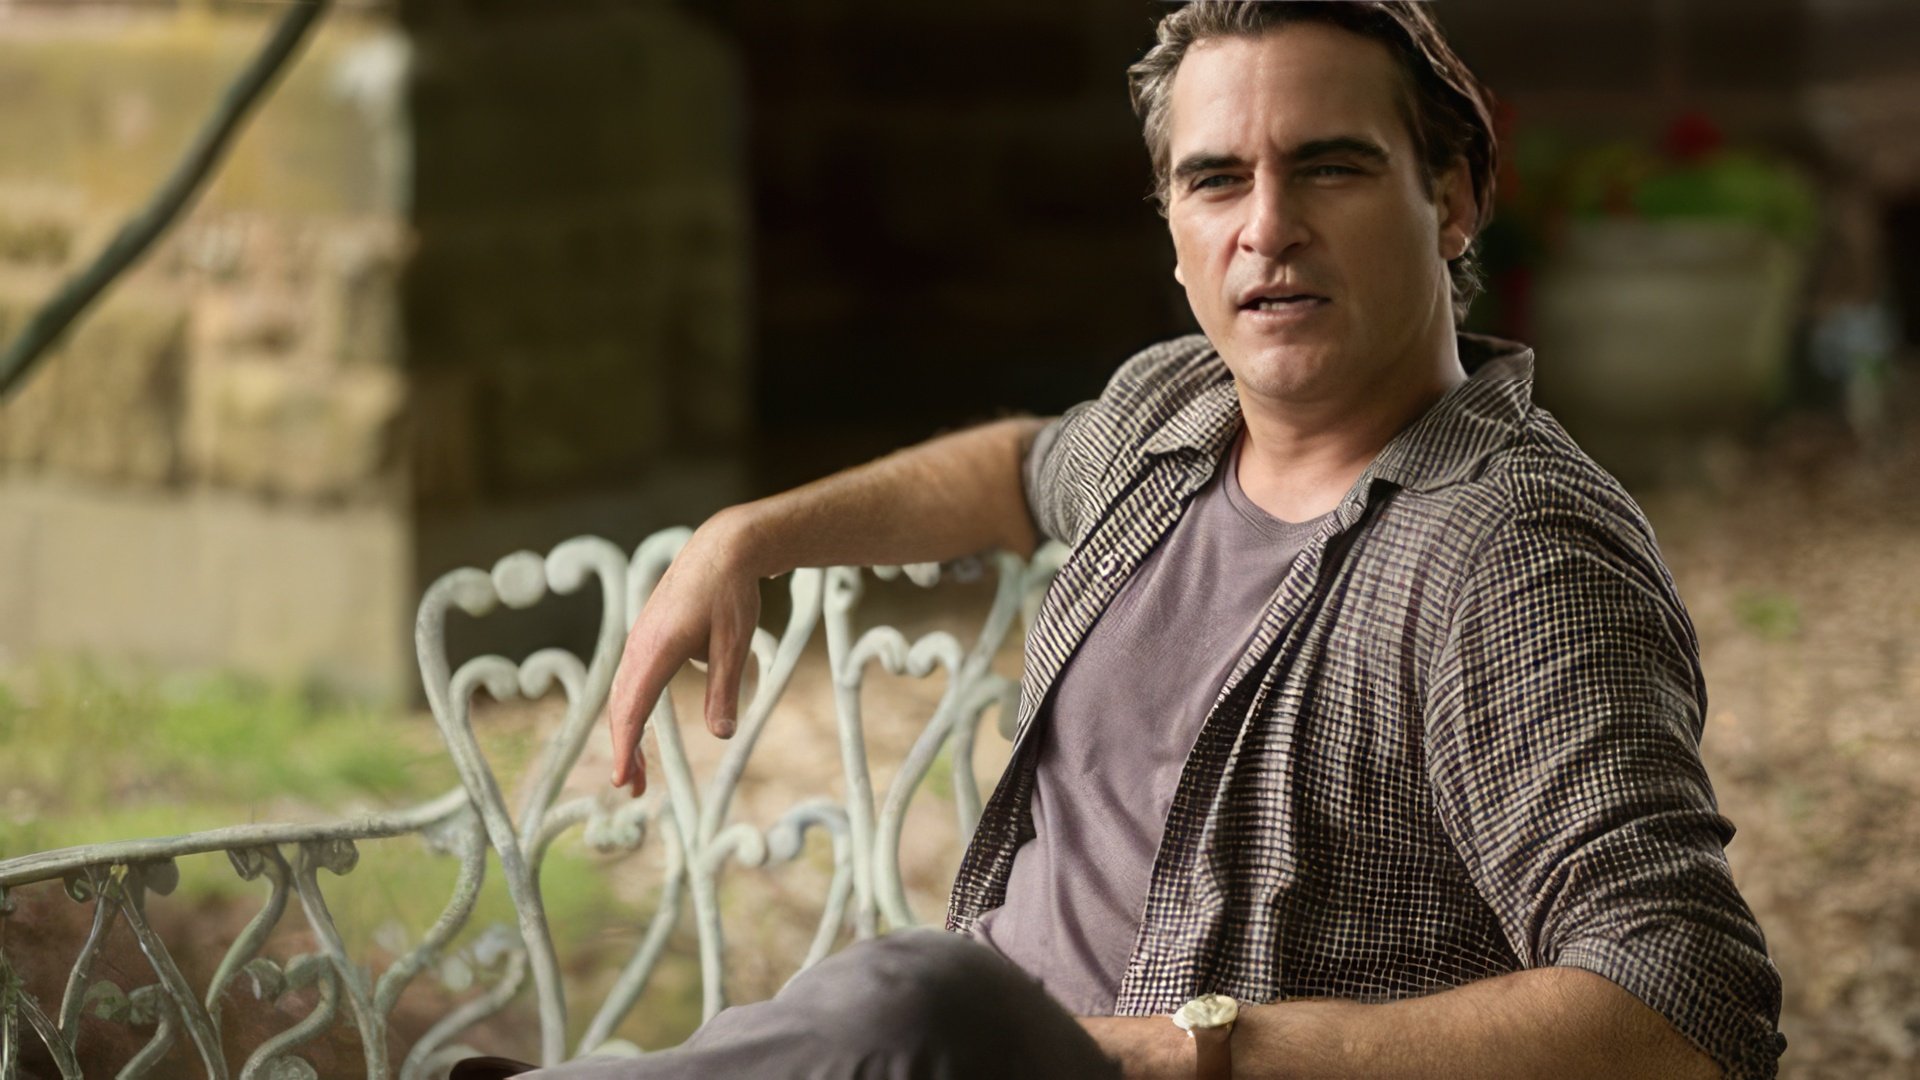 A still from the movie Irrational Man